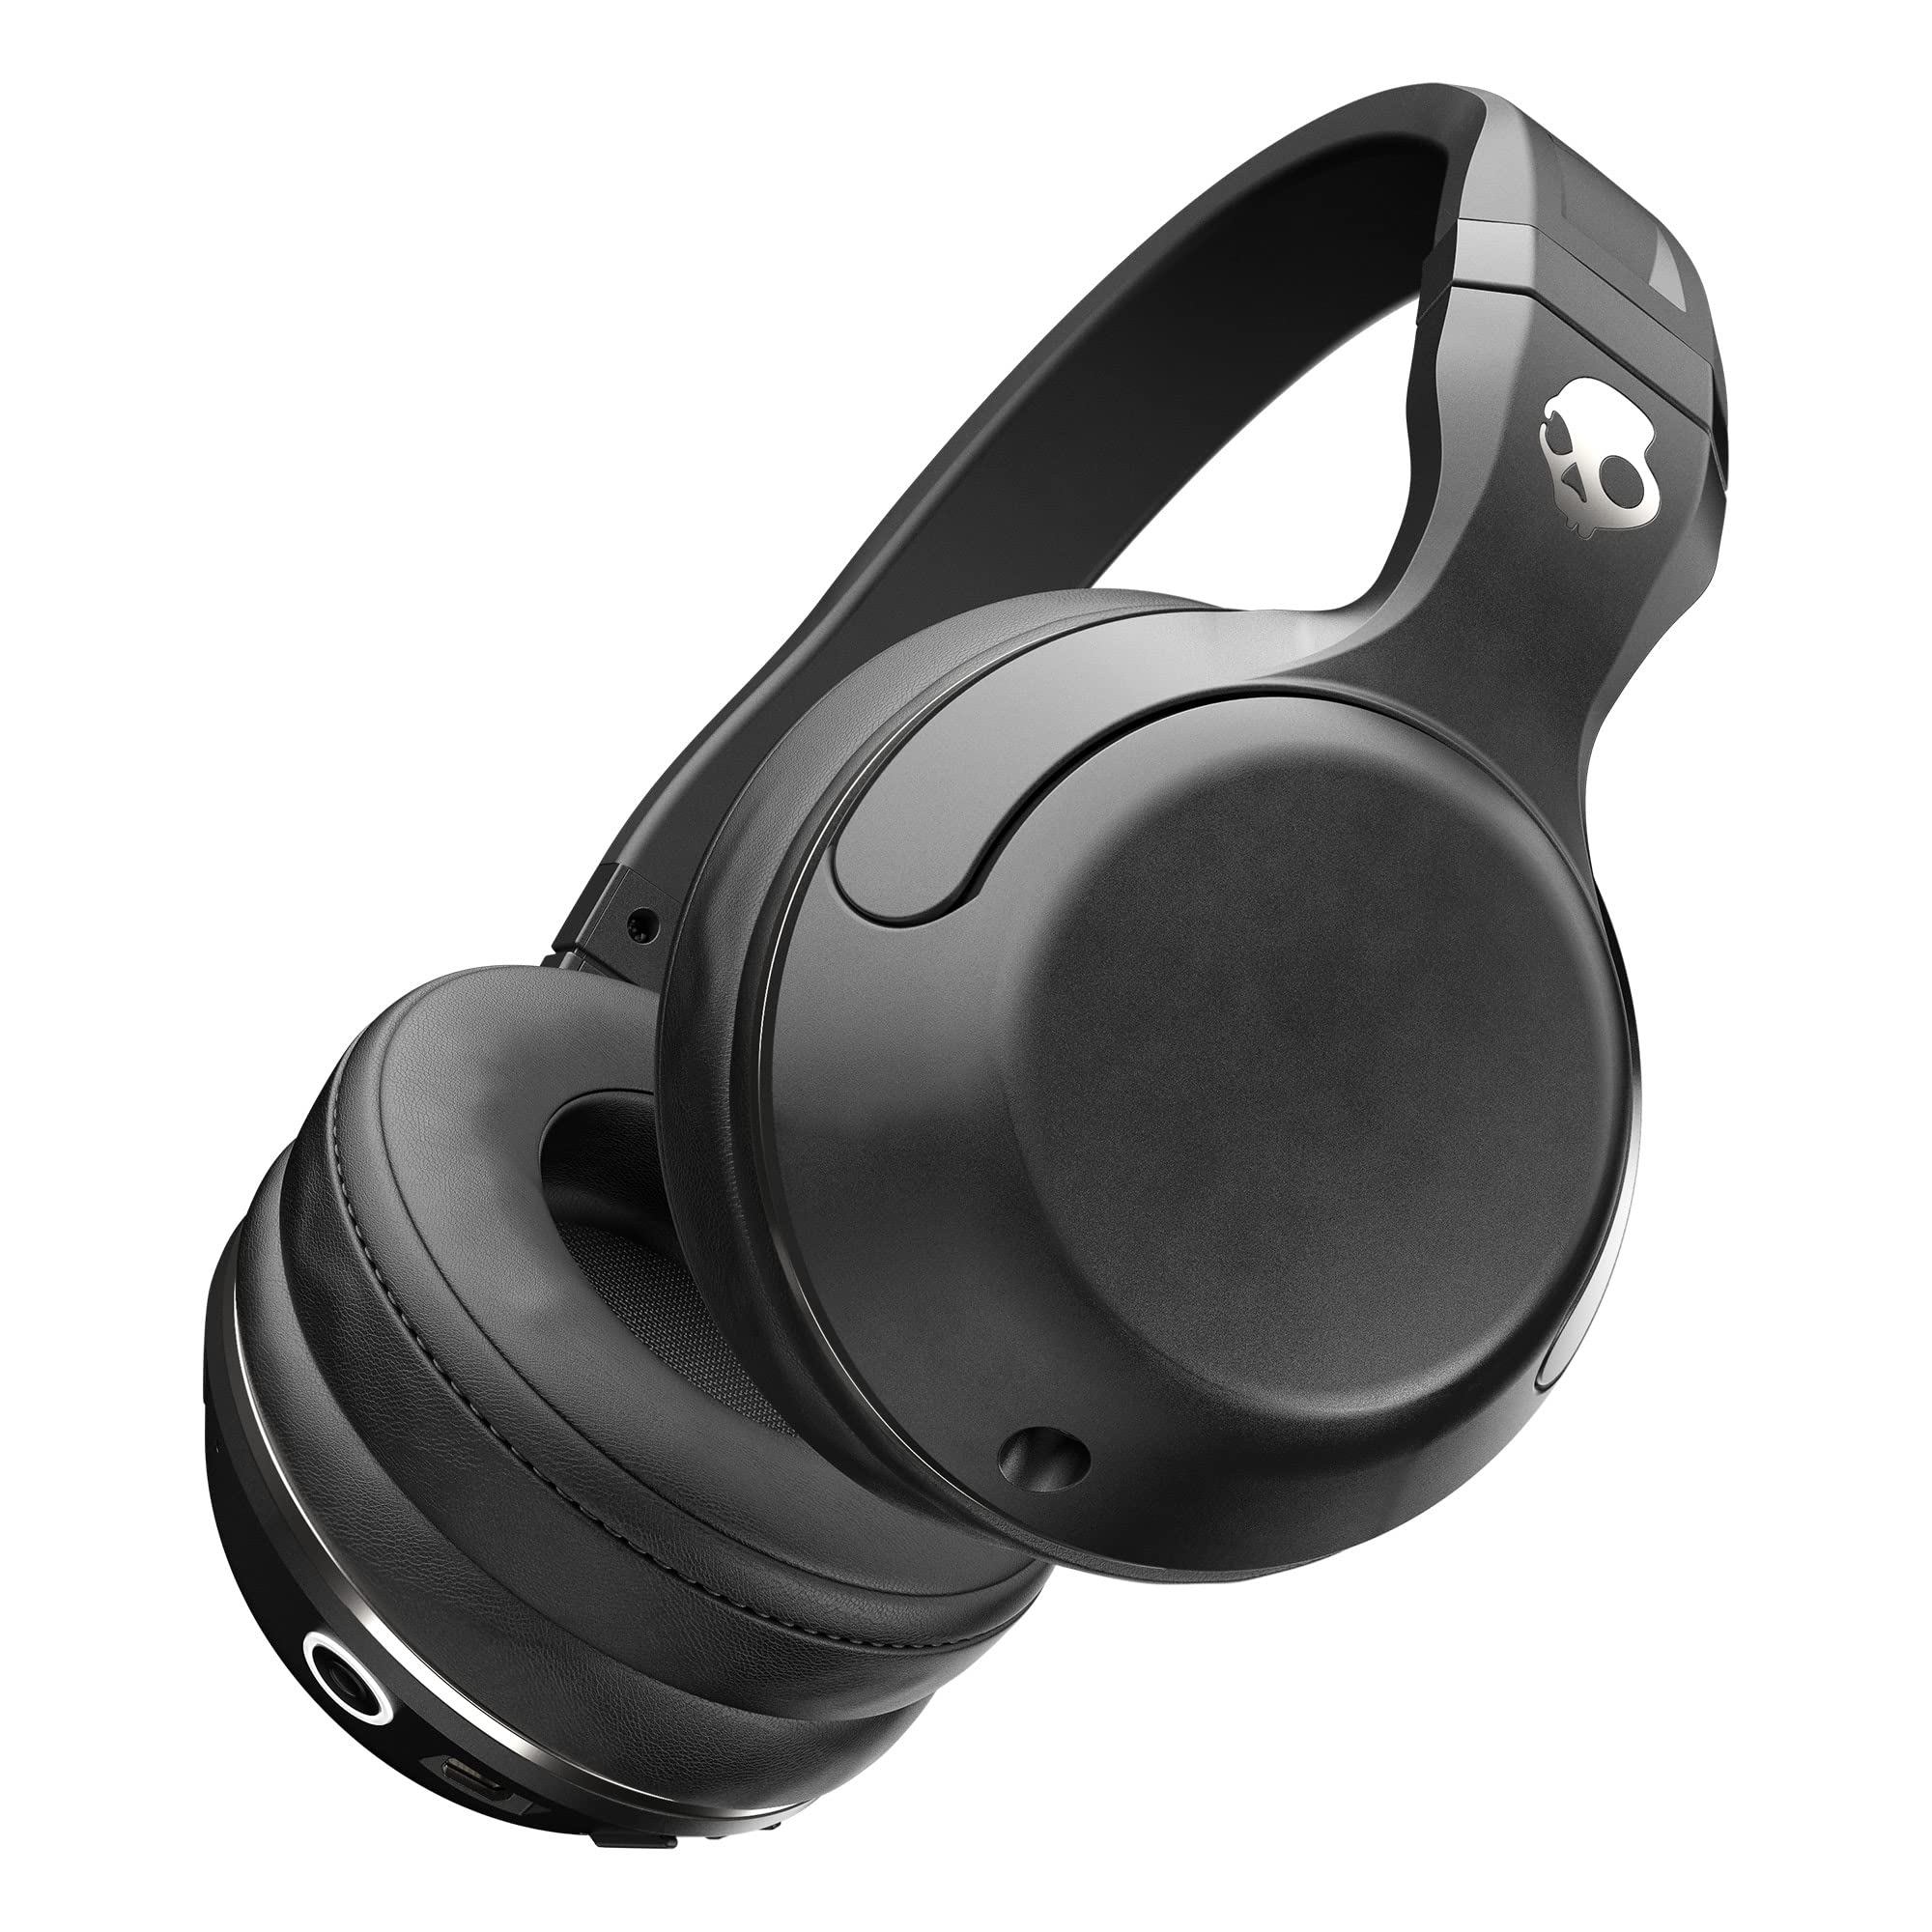 Skullcandy Hesh 2 Wireless Over-Ear Bluetooth Headphones for iPhone and Android with Microphone / 15 Hours of Battery Life / Great for Music, School, Workouts, Travel, and Gaming - Black